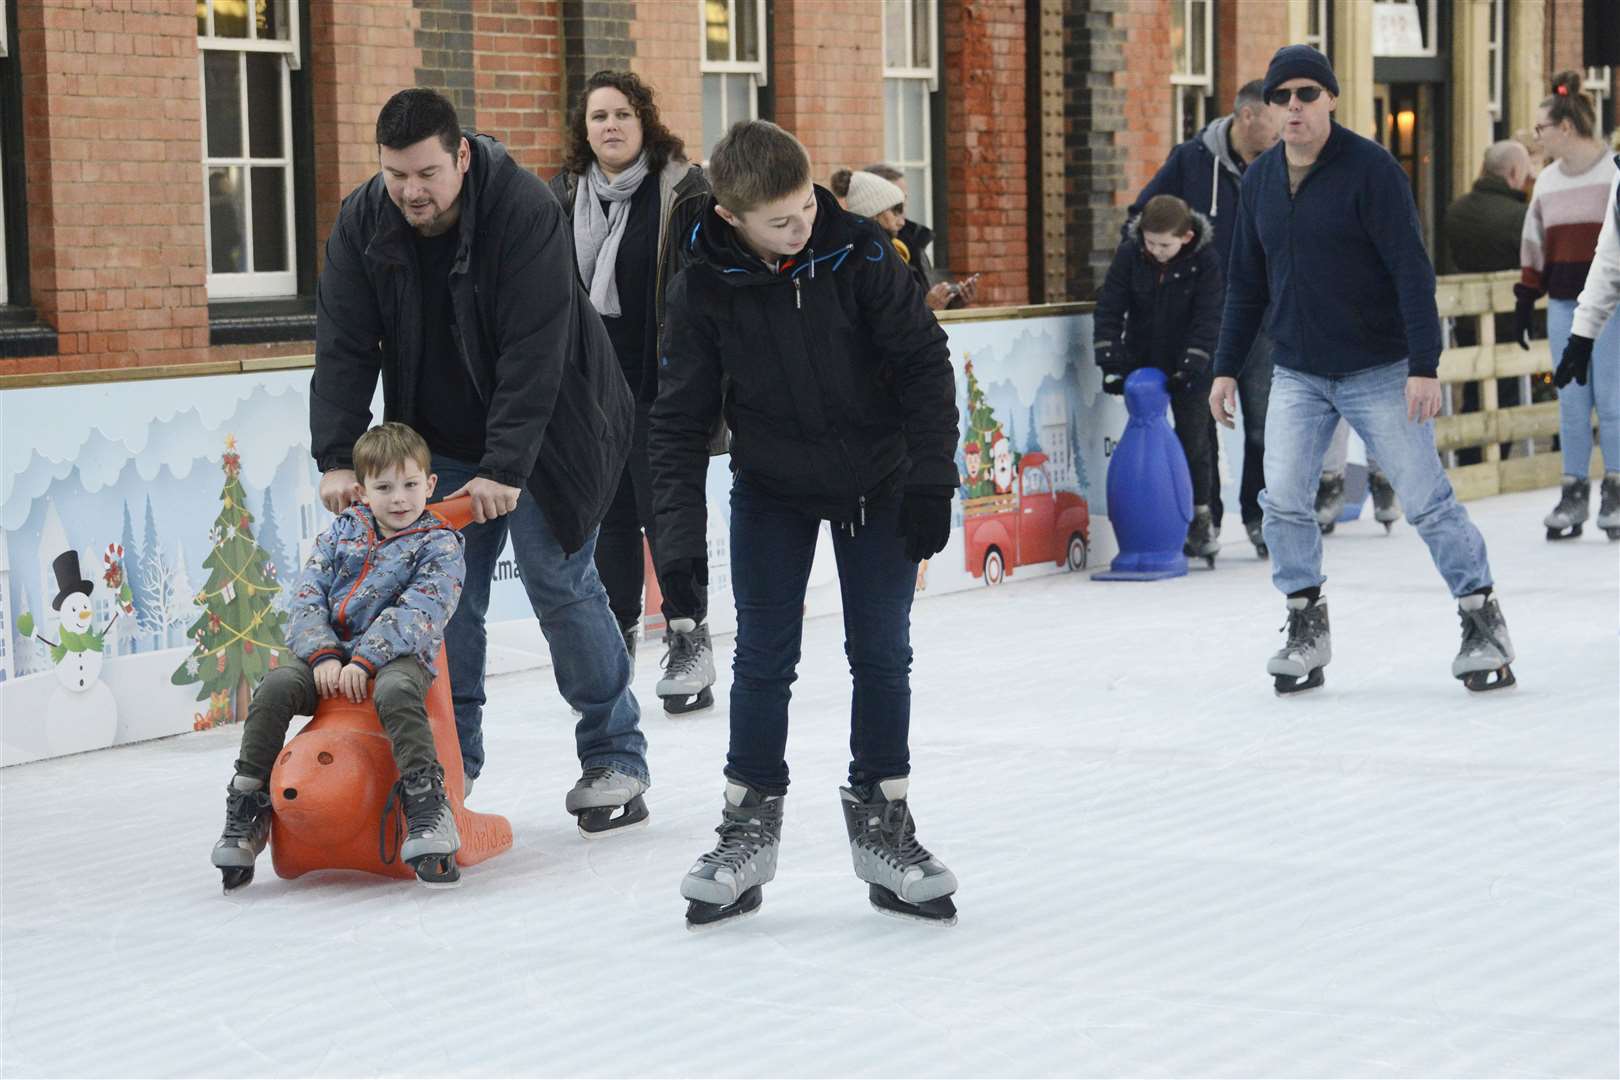 Organisers said an ice-rink attraction brought added concerns about social distancing. Picture: Paul Amos